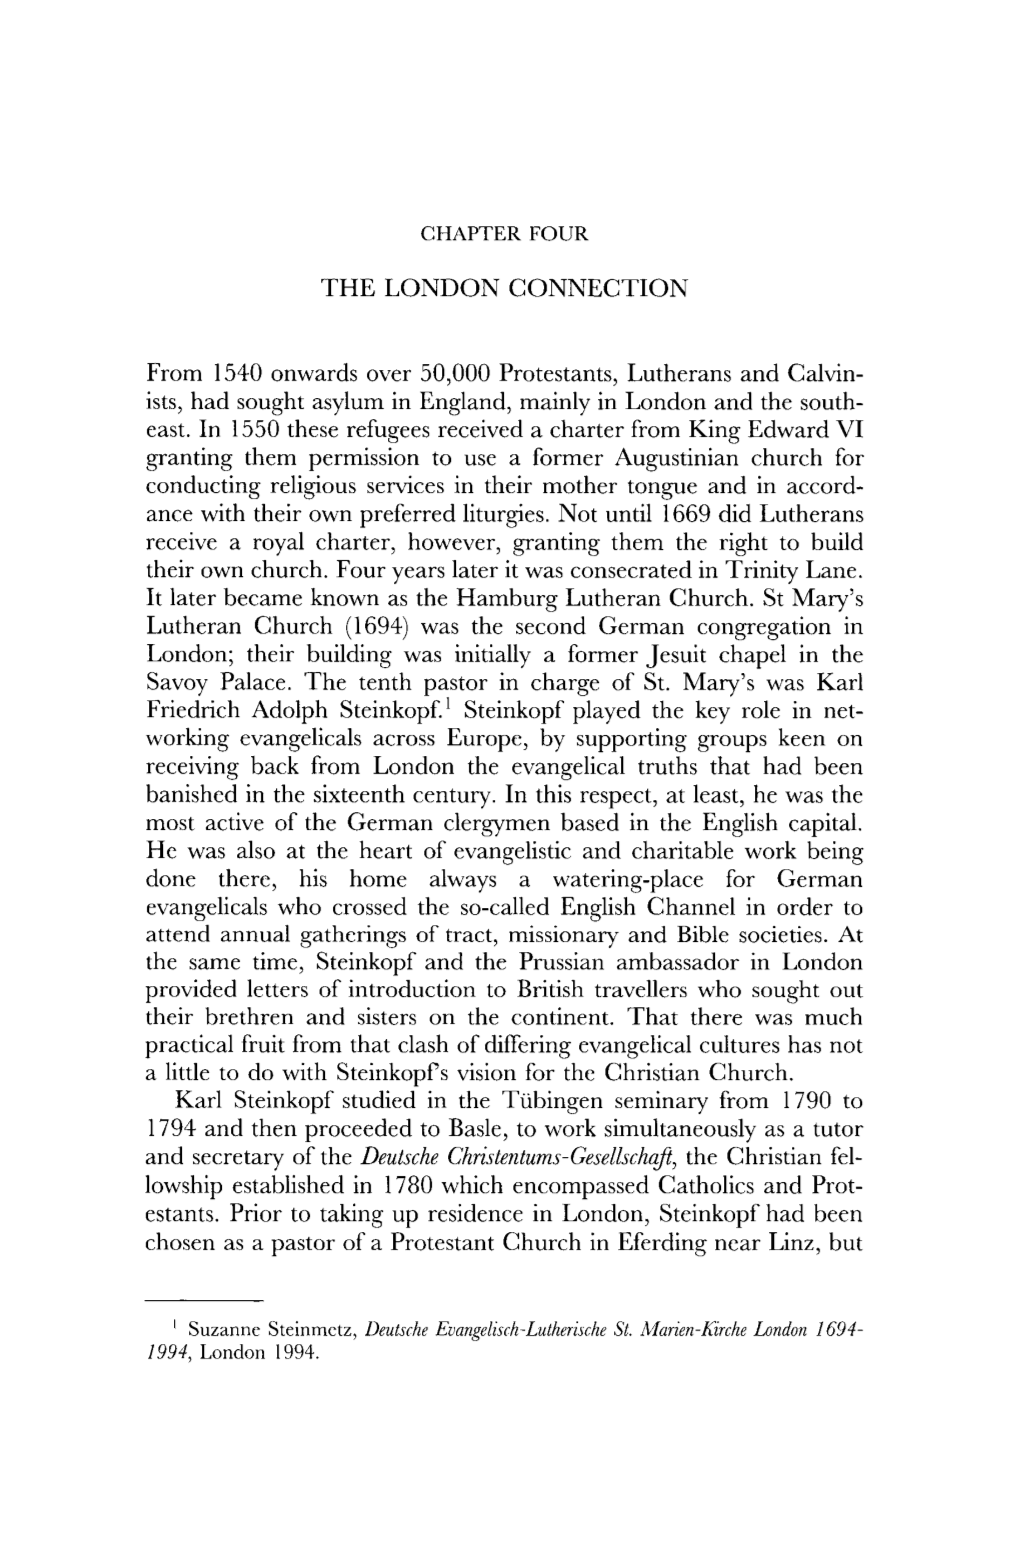 THE LONDON CONNECTION from 1540 Onwards Over 50000